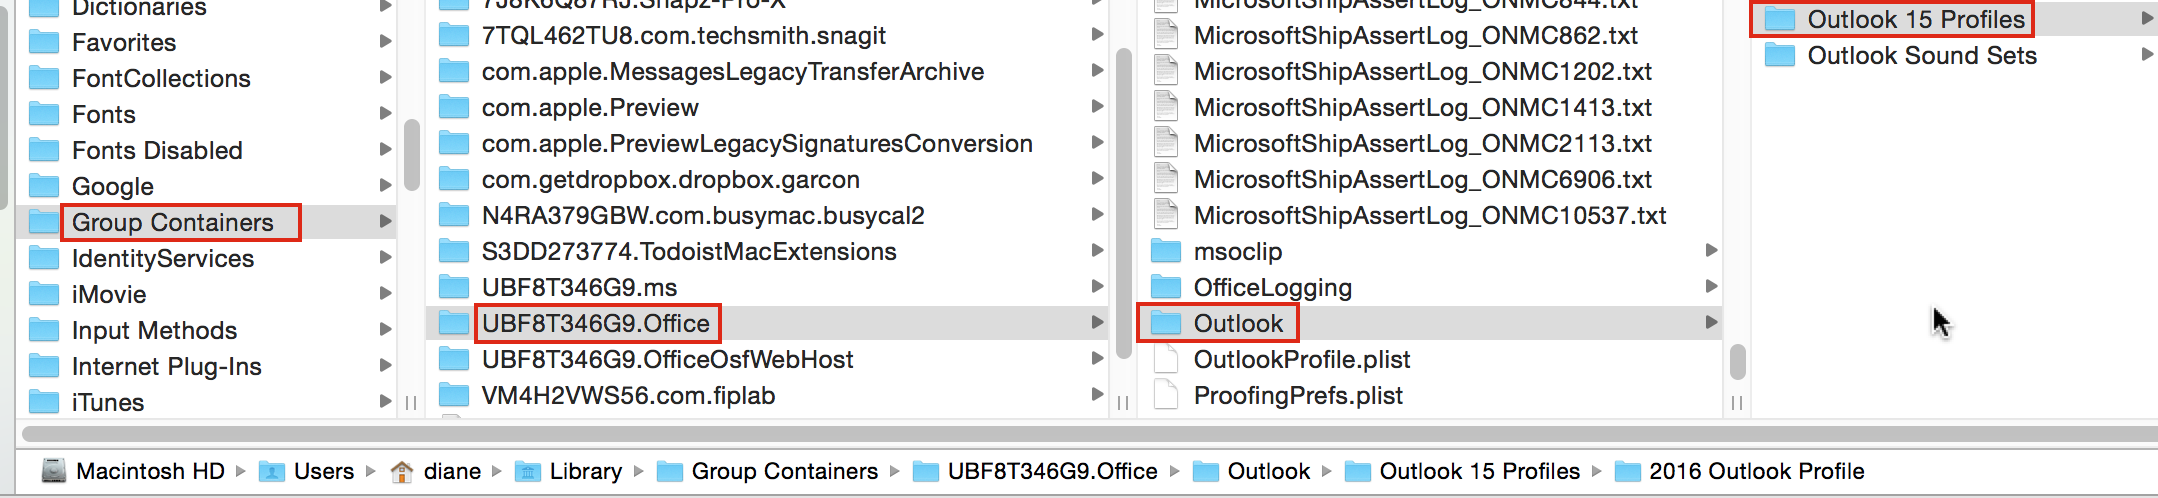 outlook for mac on my computer folder location on hd